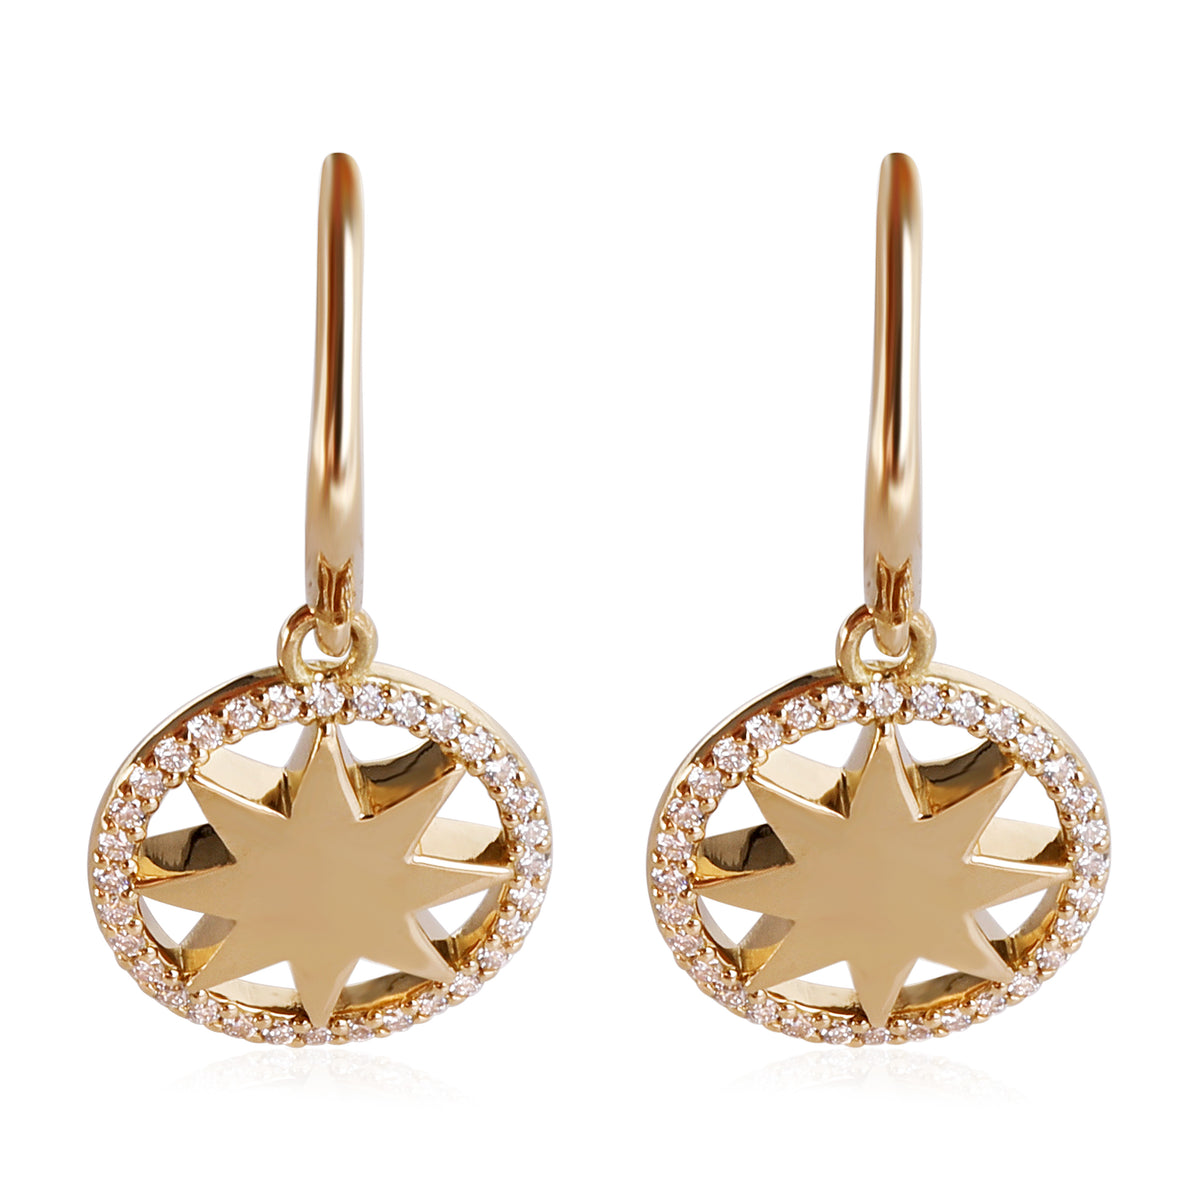 Tiffany & Co. Paloma Picasso Star Drop Diamond Earring in 18kt Gold 0.12 CTW